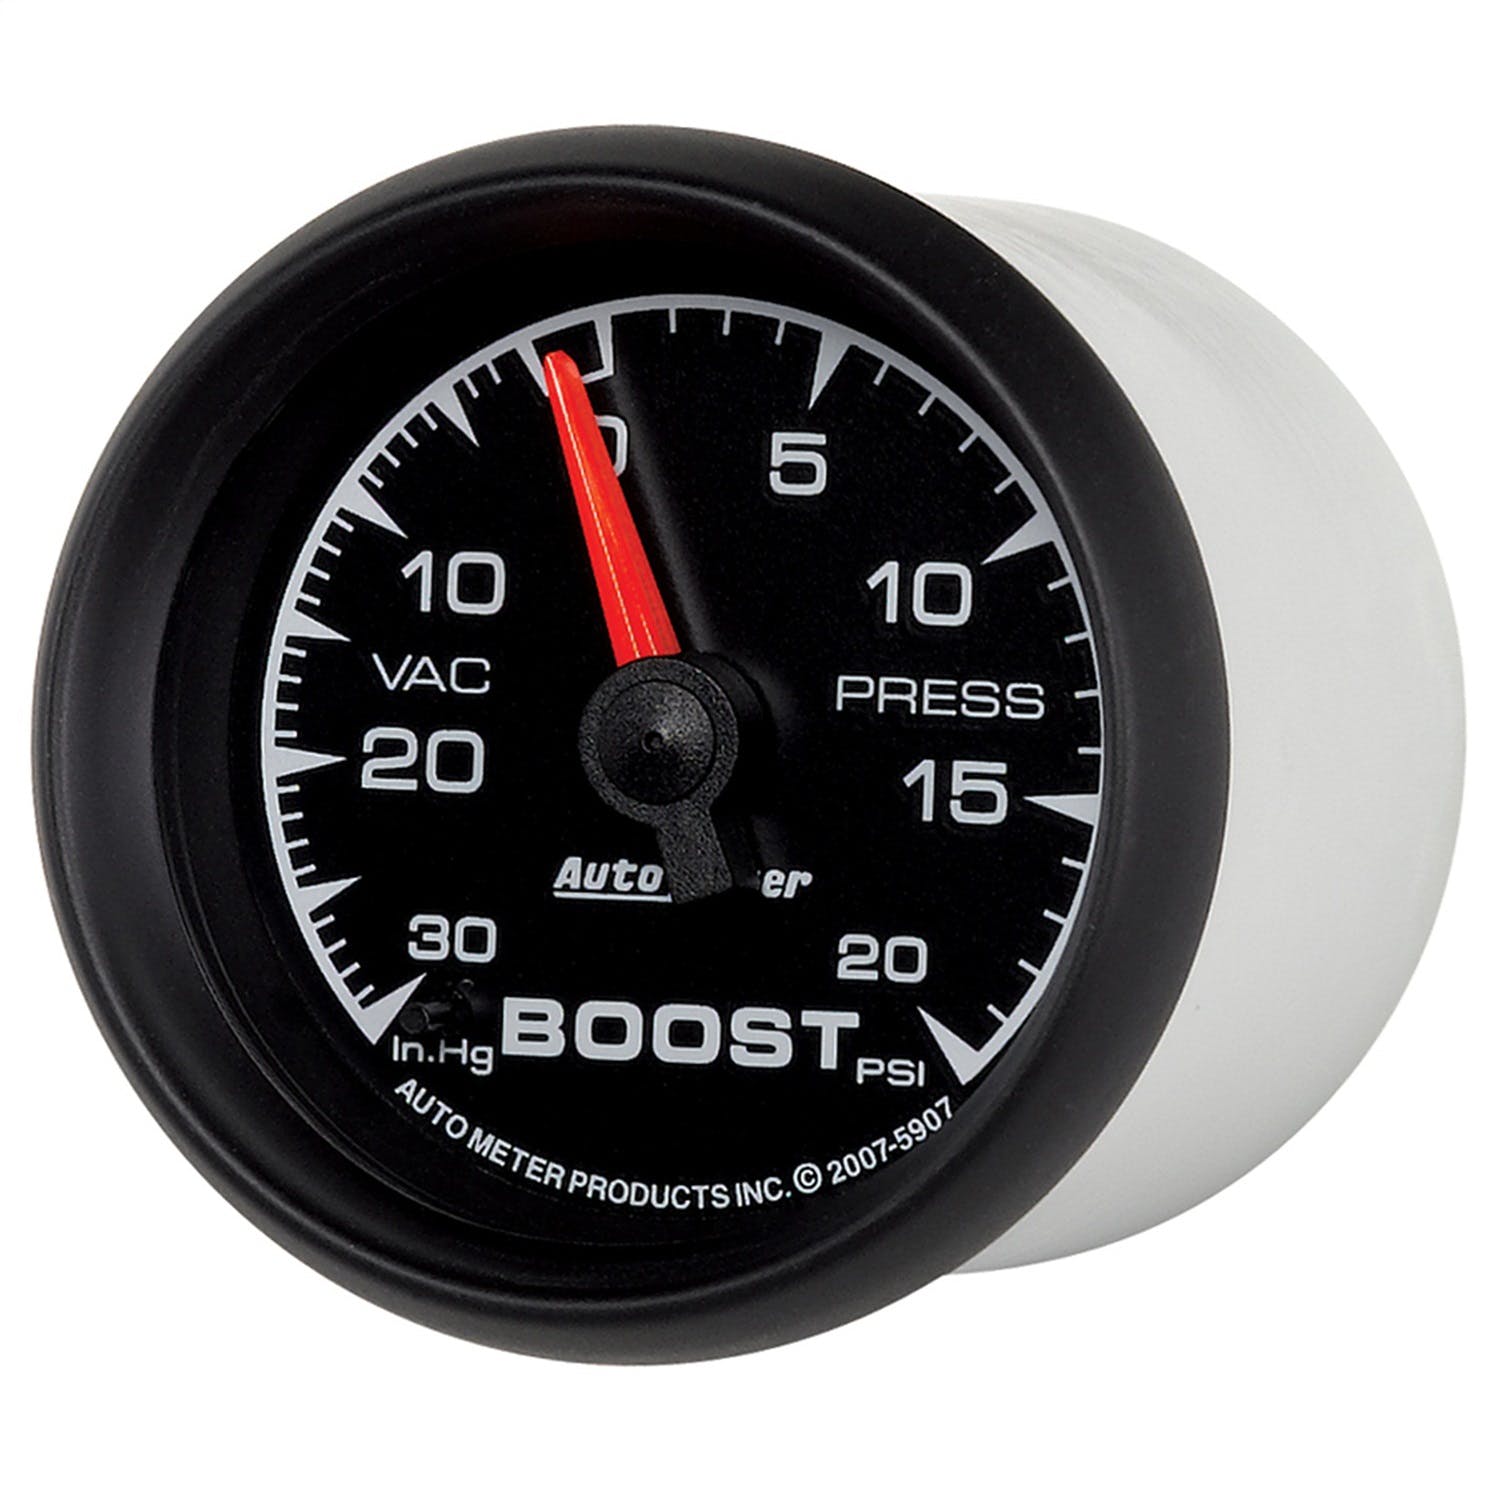 AutoMeter Products 5907 2-1/16in Boost-Vac 30 IN HG/20 PSI, Mechanical